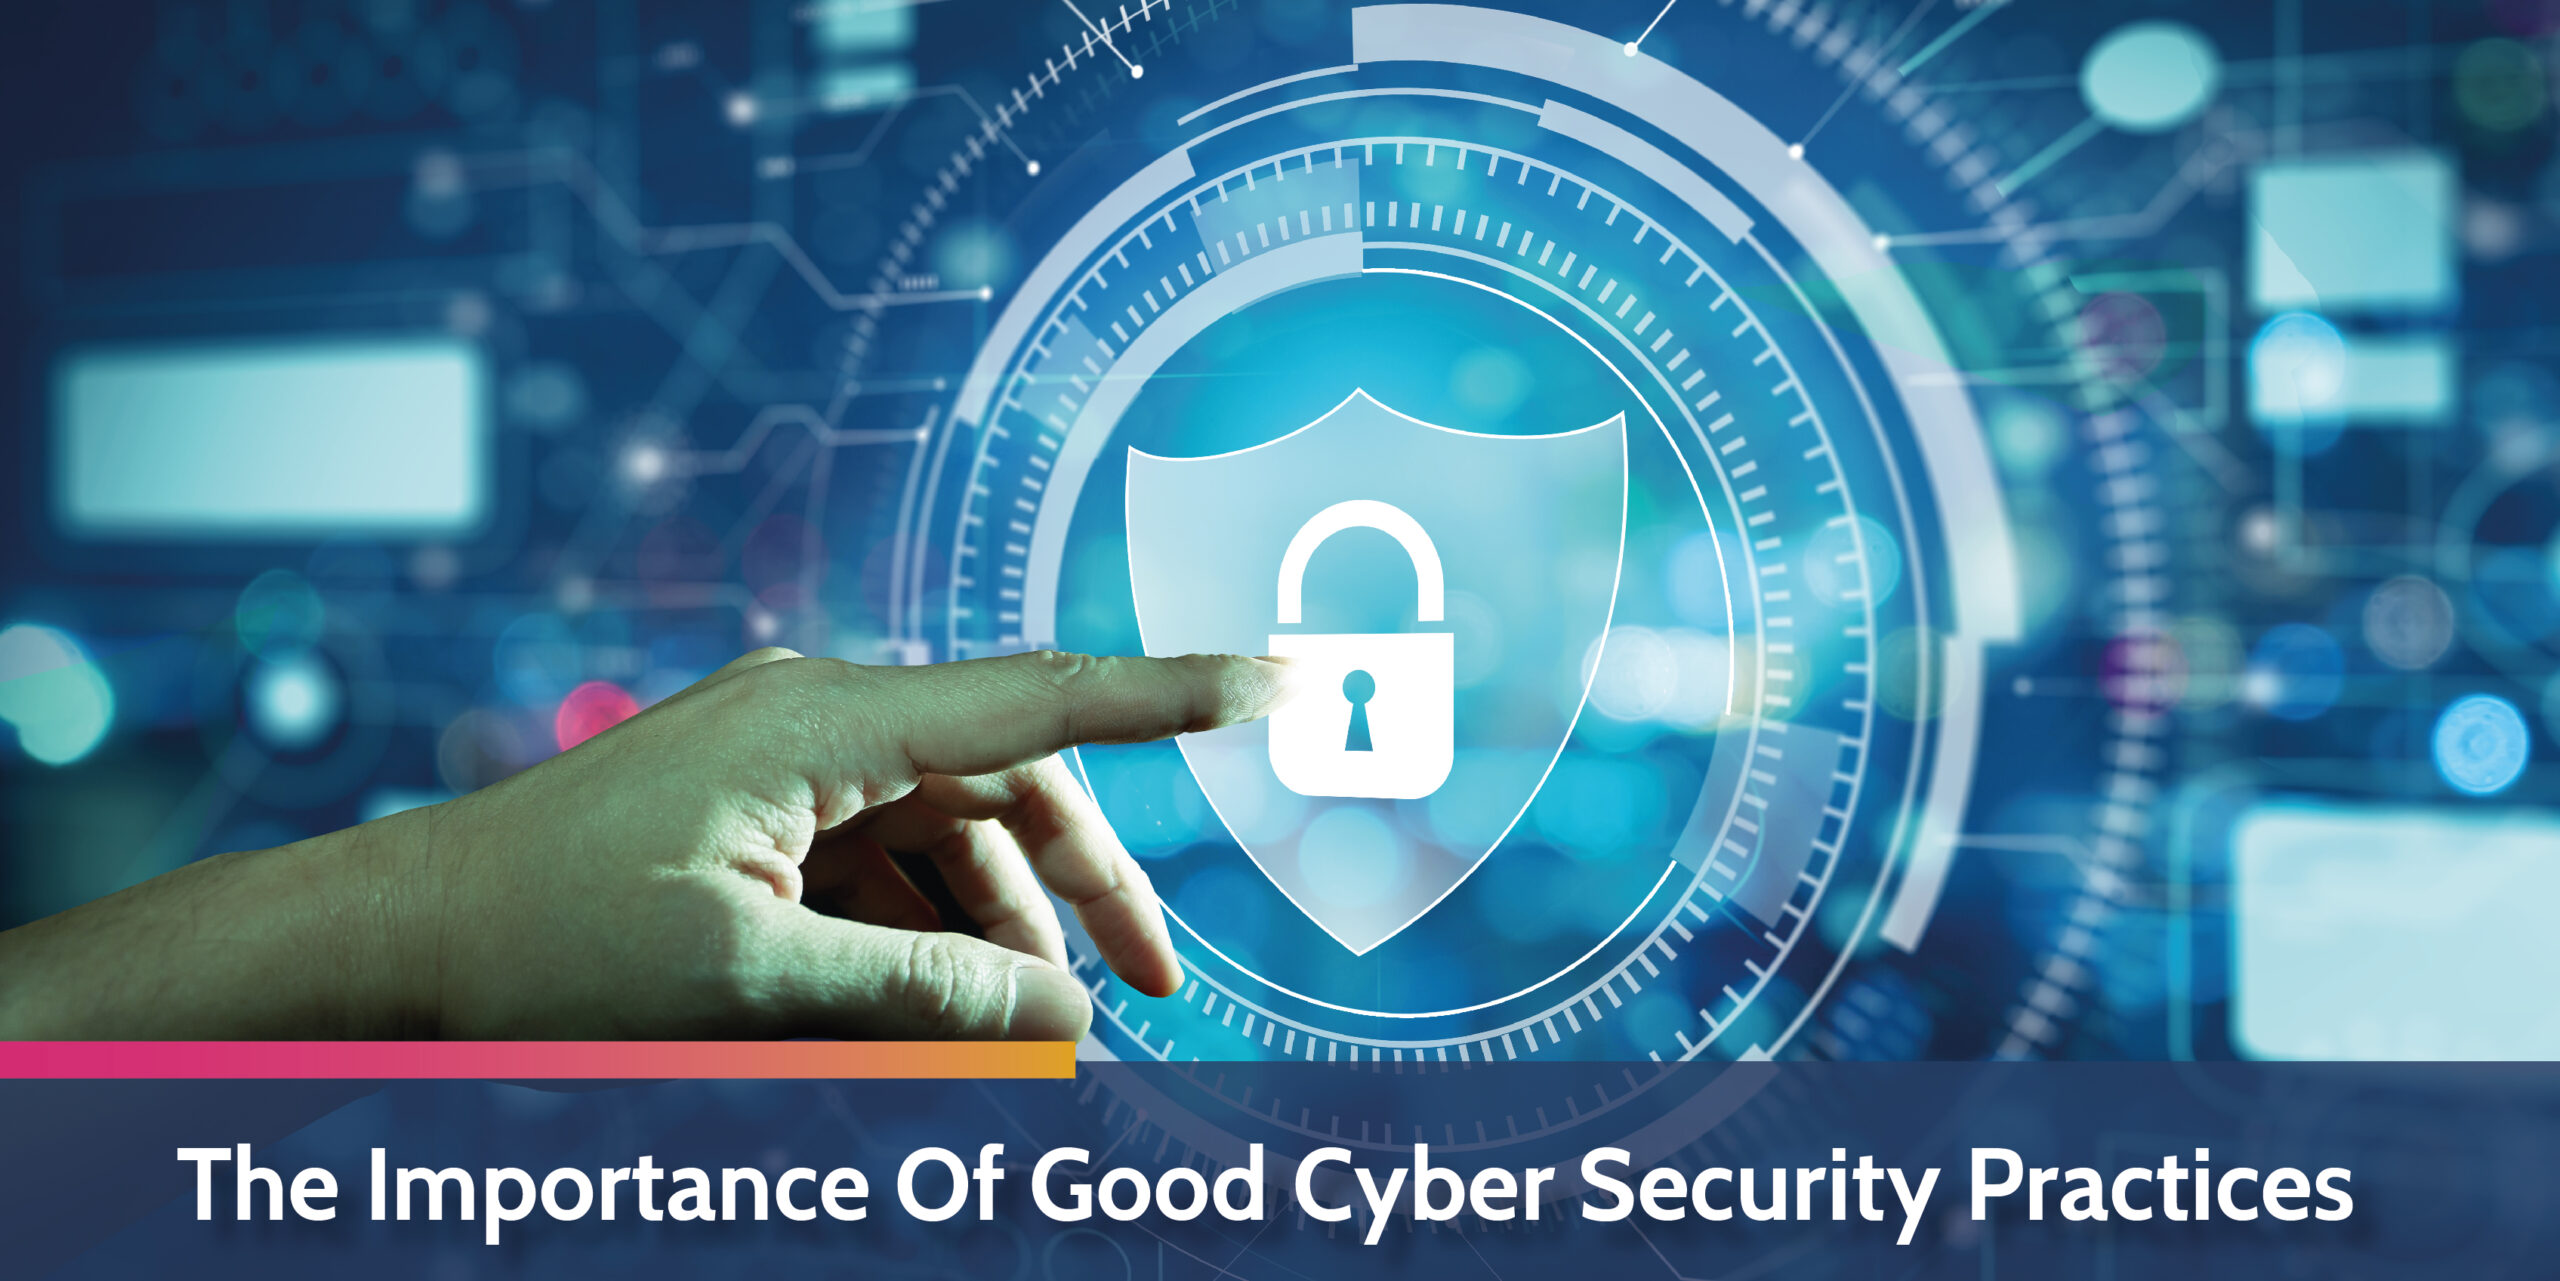 The importance of good cyber security practices